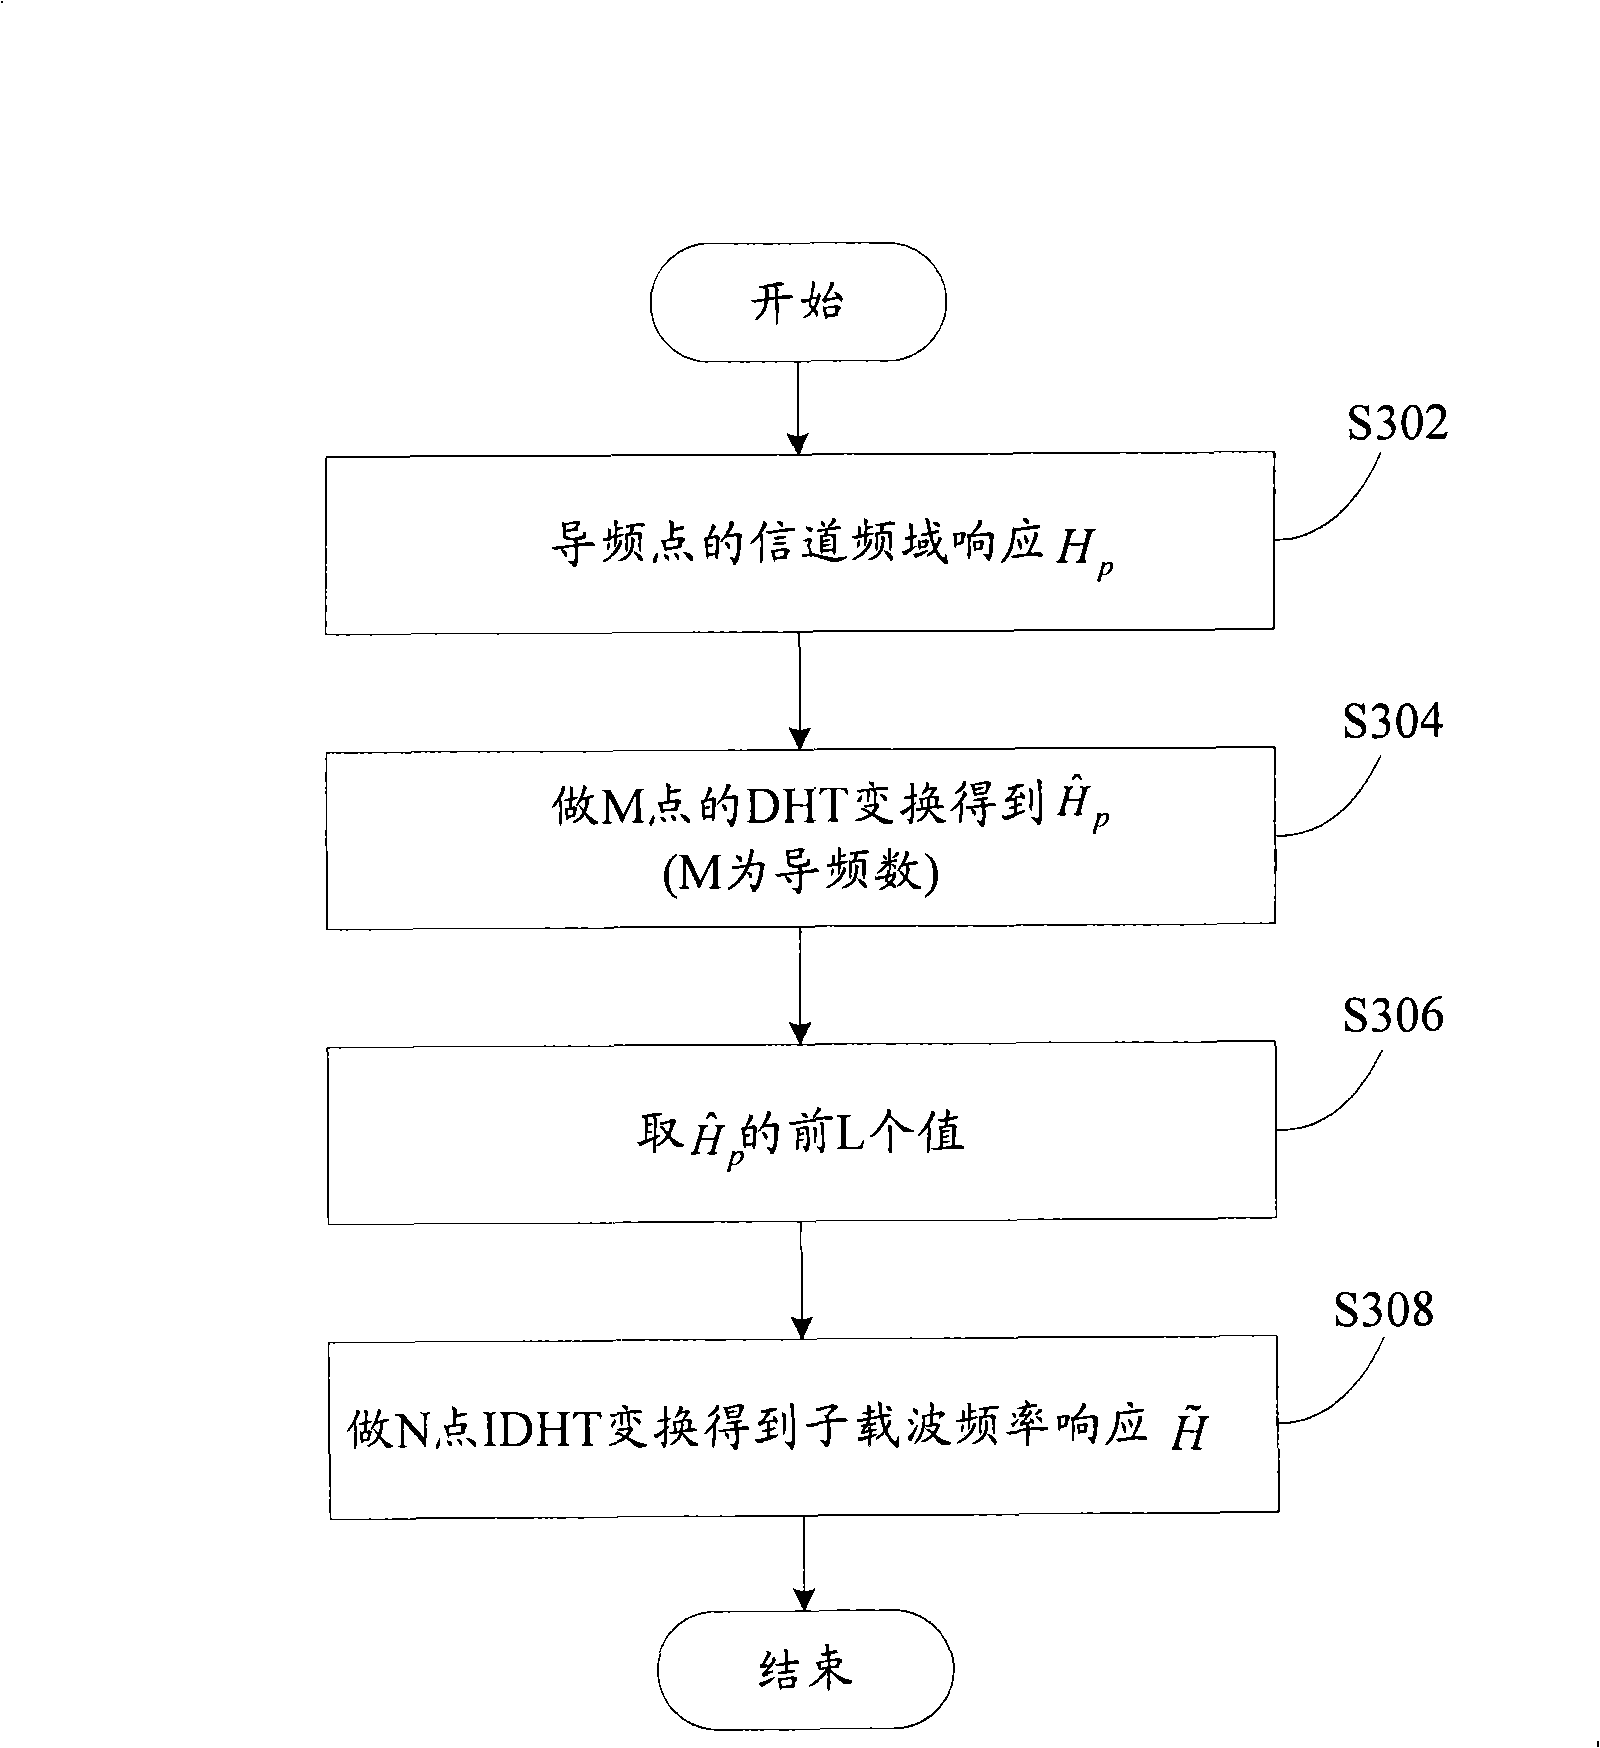 Channel estimation method for MIMO OFDM system